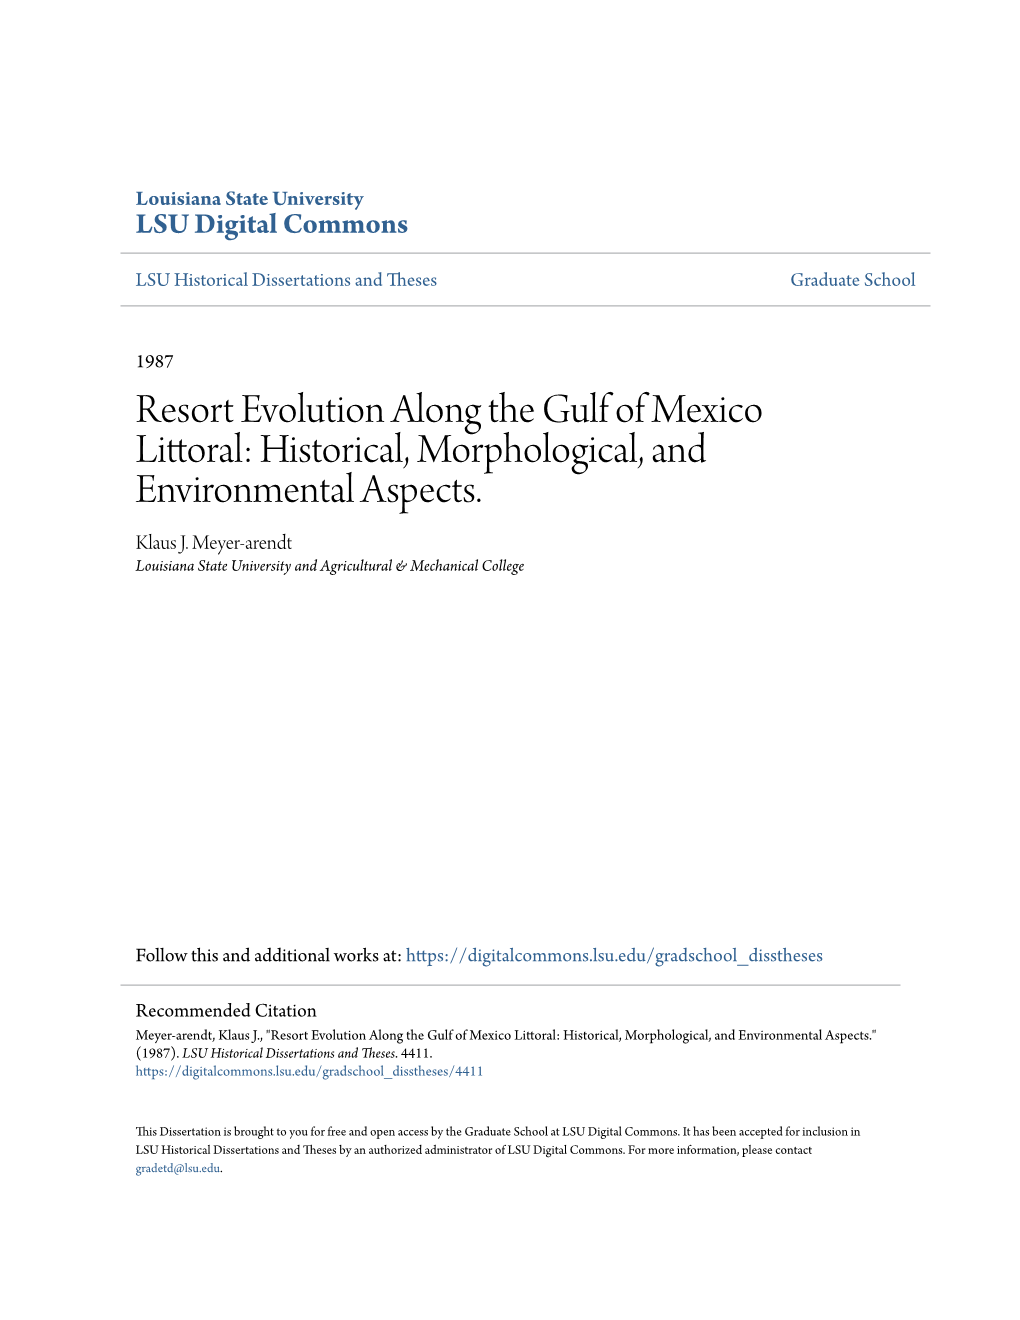 Resort Evolution Along the Gulf of Mexico Littoral: Historical, Morphological, and Environmental Aspects